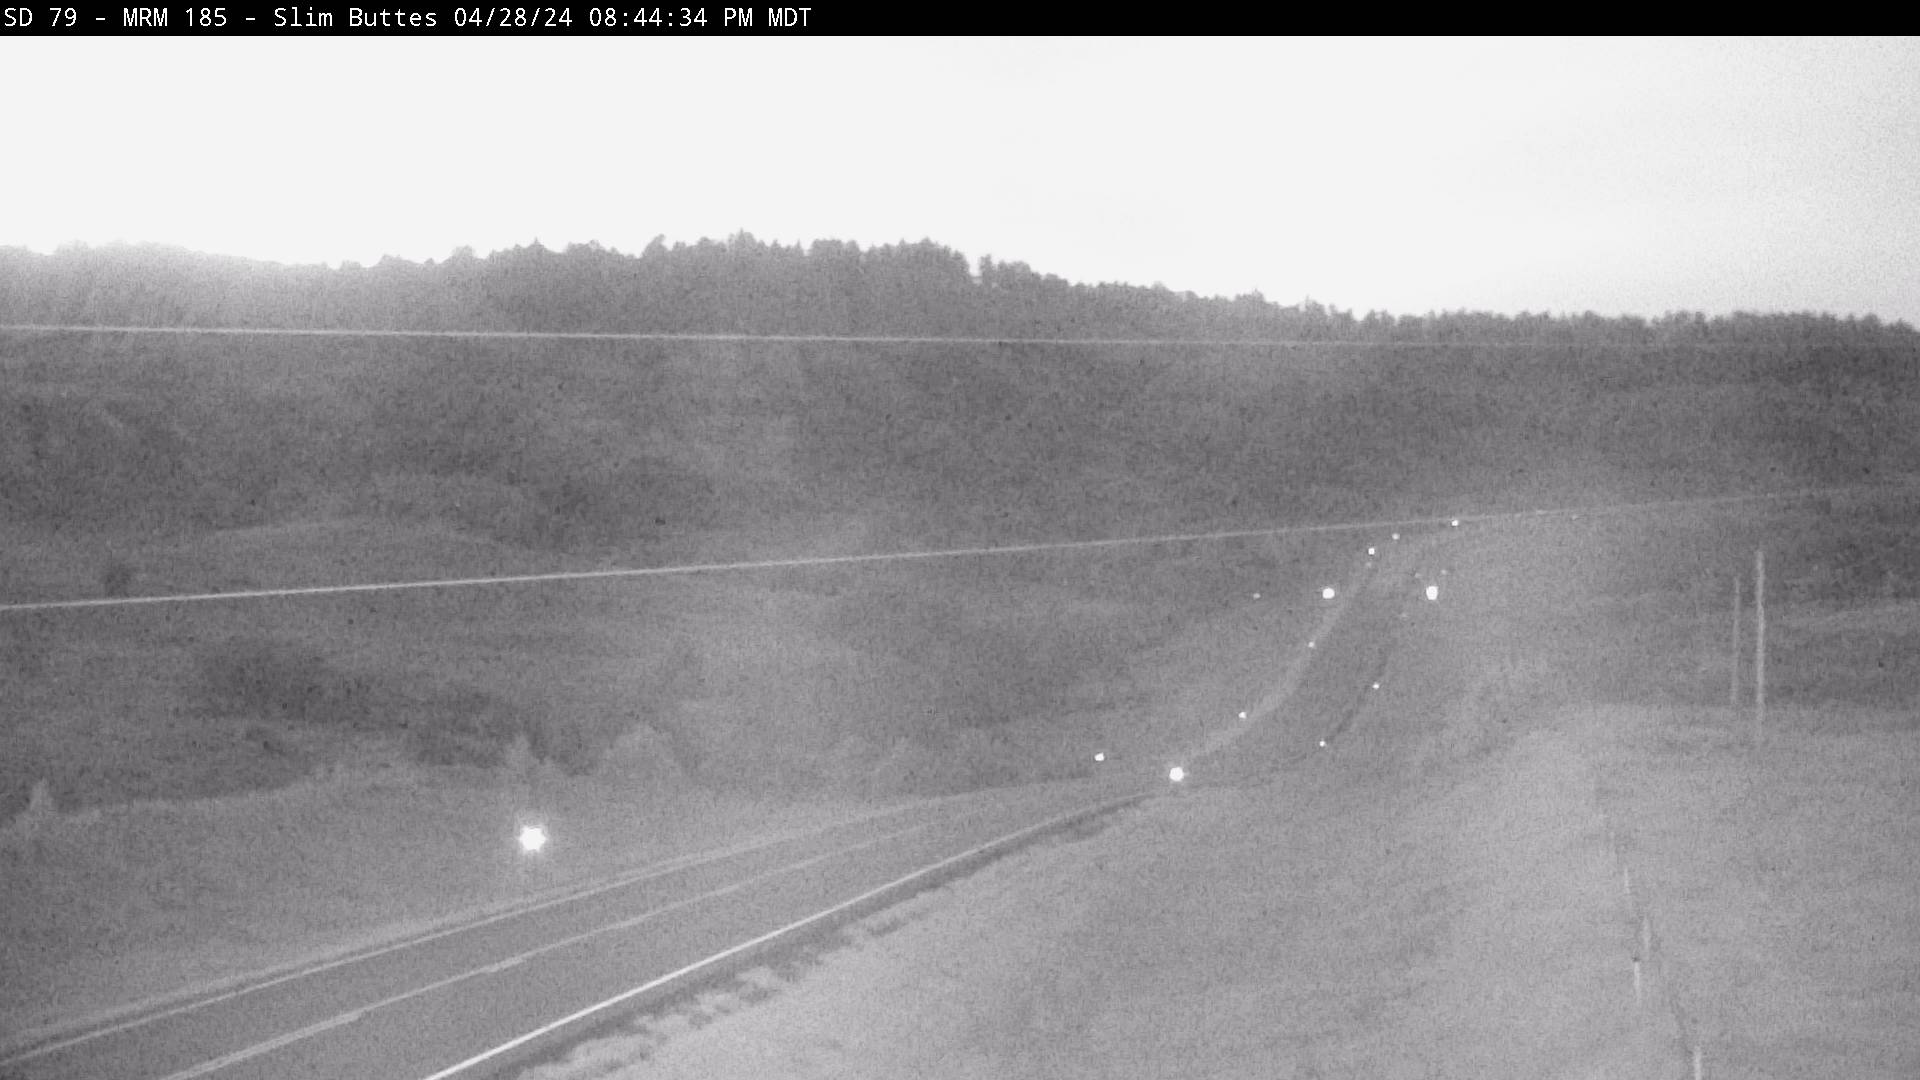 Traffic Cam along SD-79 @ MP 185 - North Player